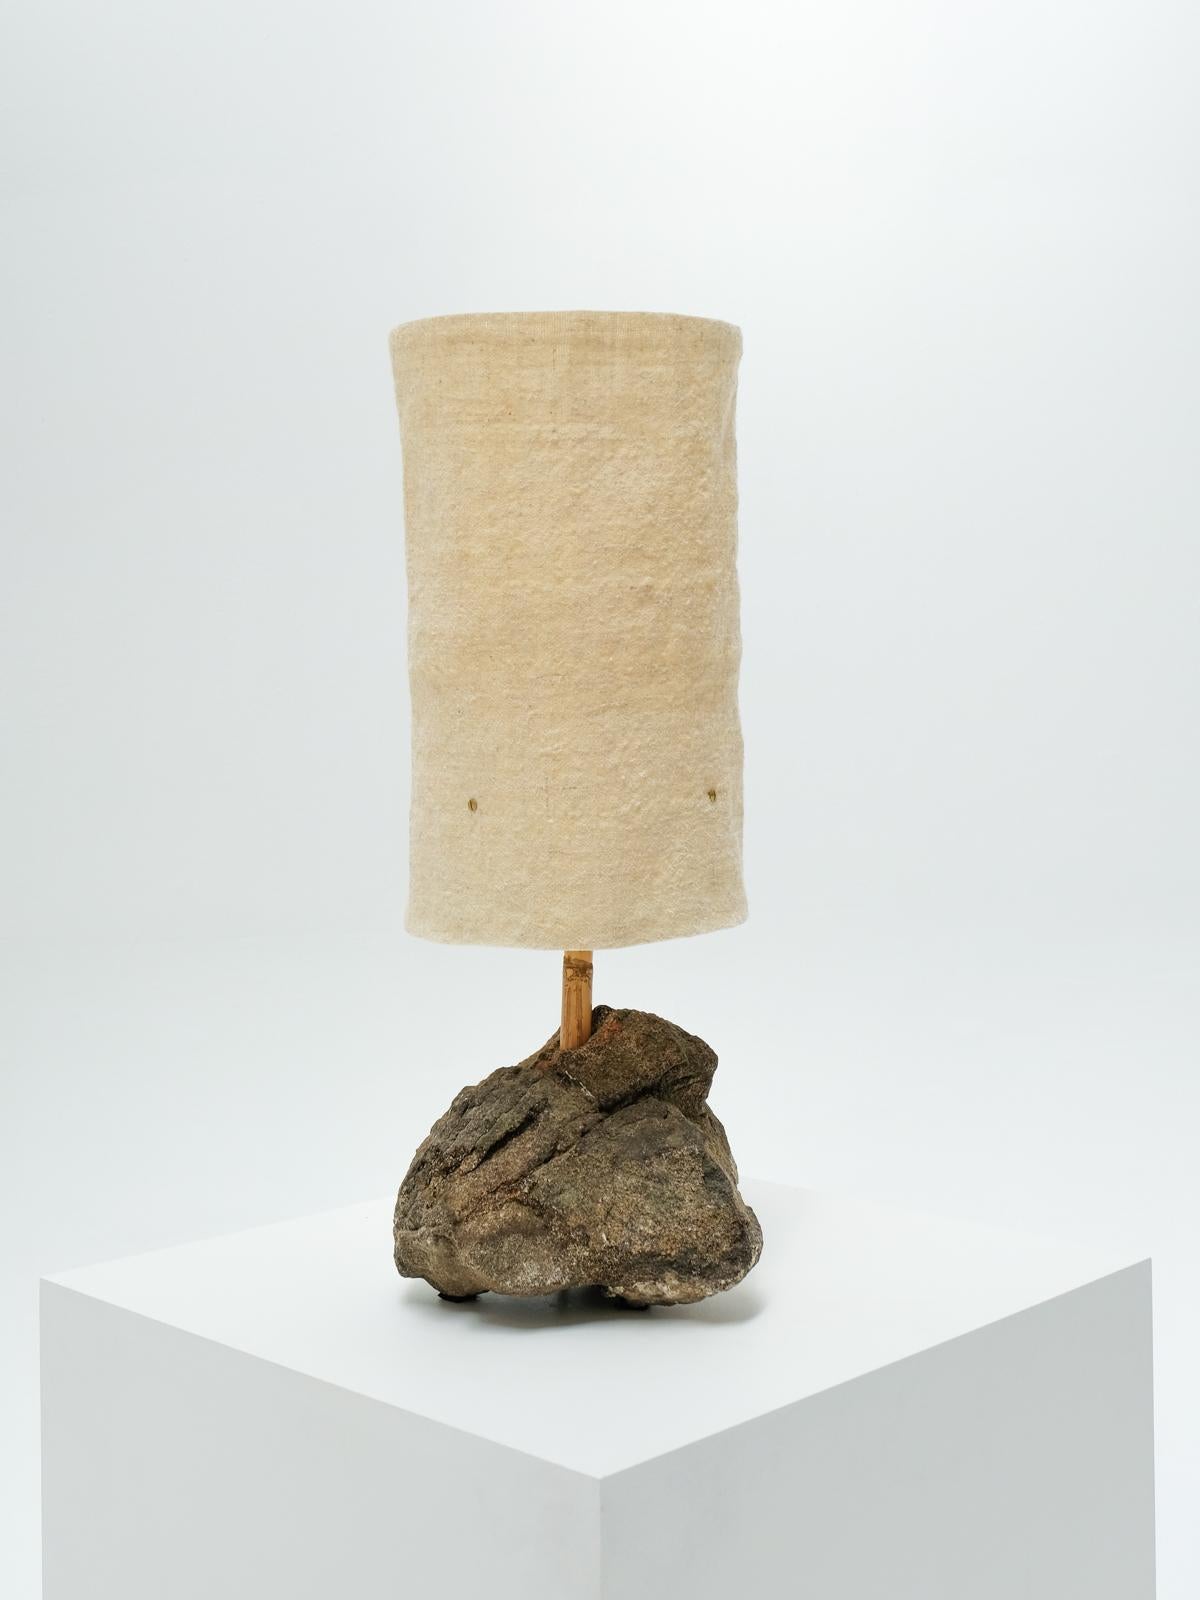 Hjra Table Lamp Large, Handspun, Handwoven wool Lampshade, Made of Rock & Reed For Sale 6